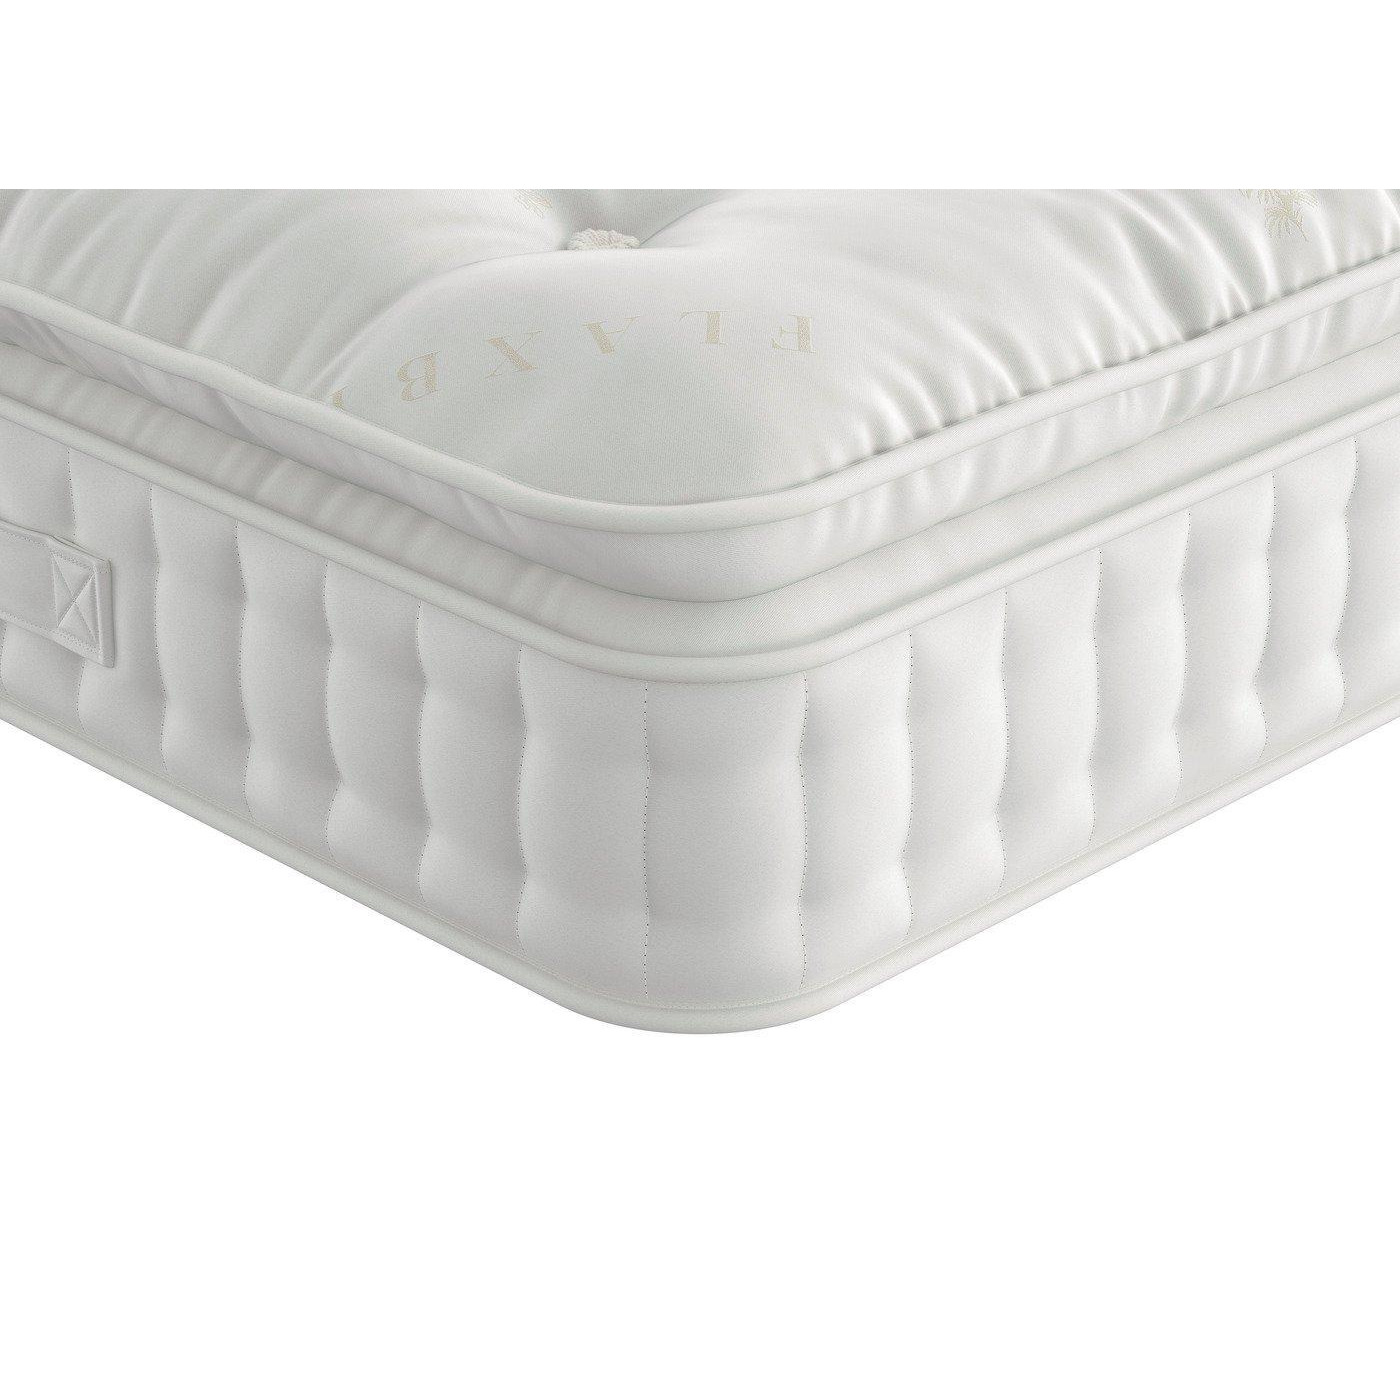 Flaxby Masters Guild 4450 Mattress - 6'6 Emperor